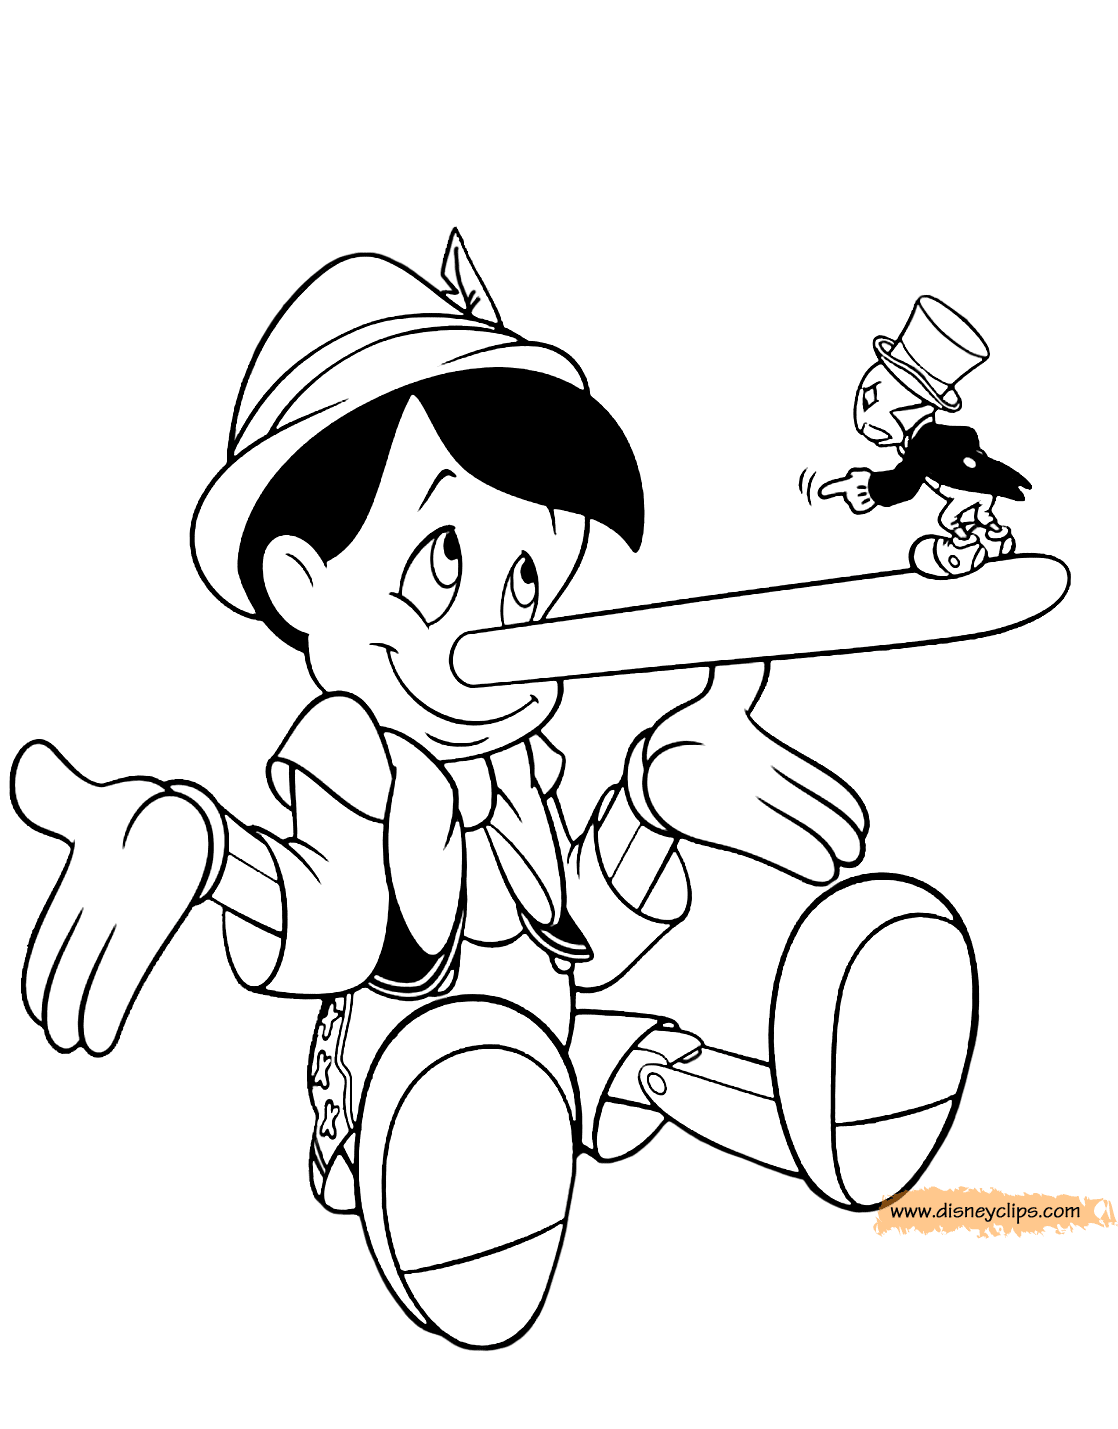 Pinocchio Coloring Pages Disney Coloring Pages Coloring Pages | Images ...